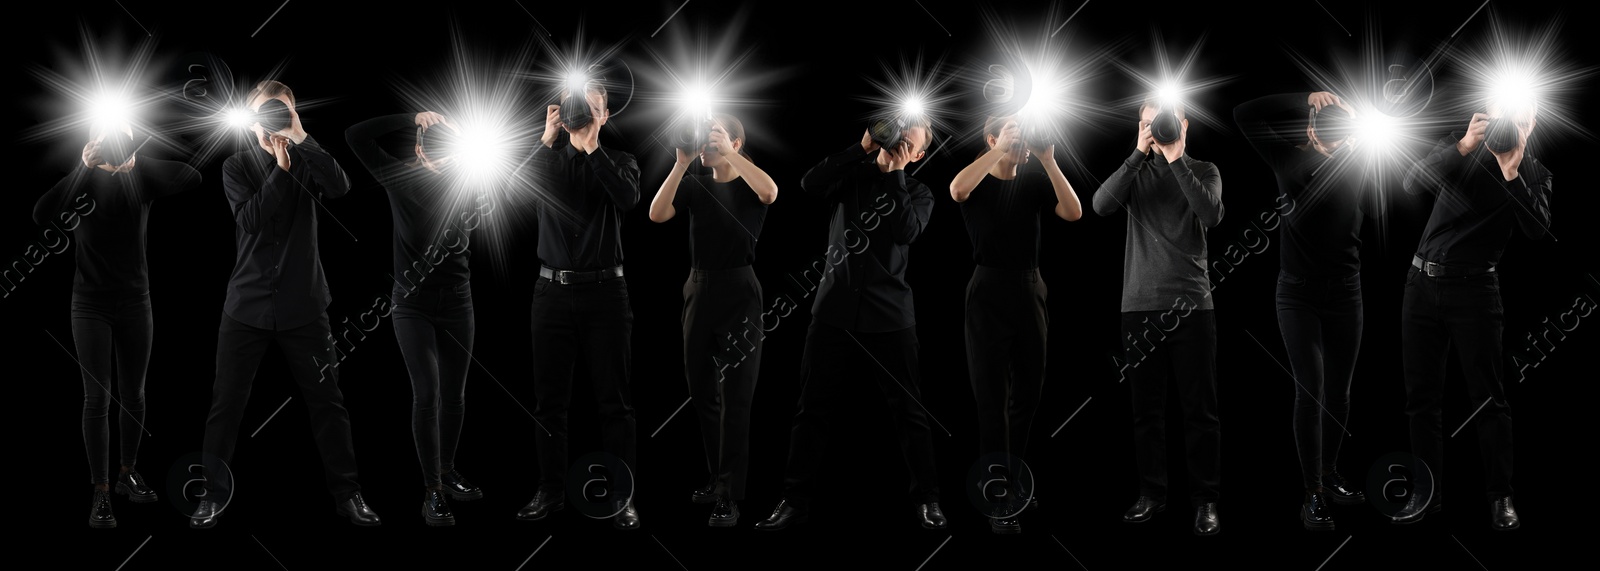 Image of Group of photographers with cameras on black background, banner design. Paparazzi taking pictures with flashes